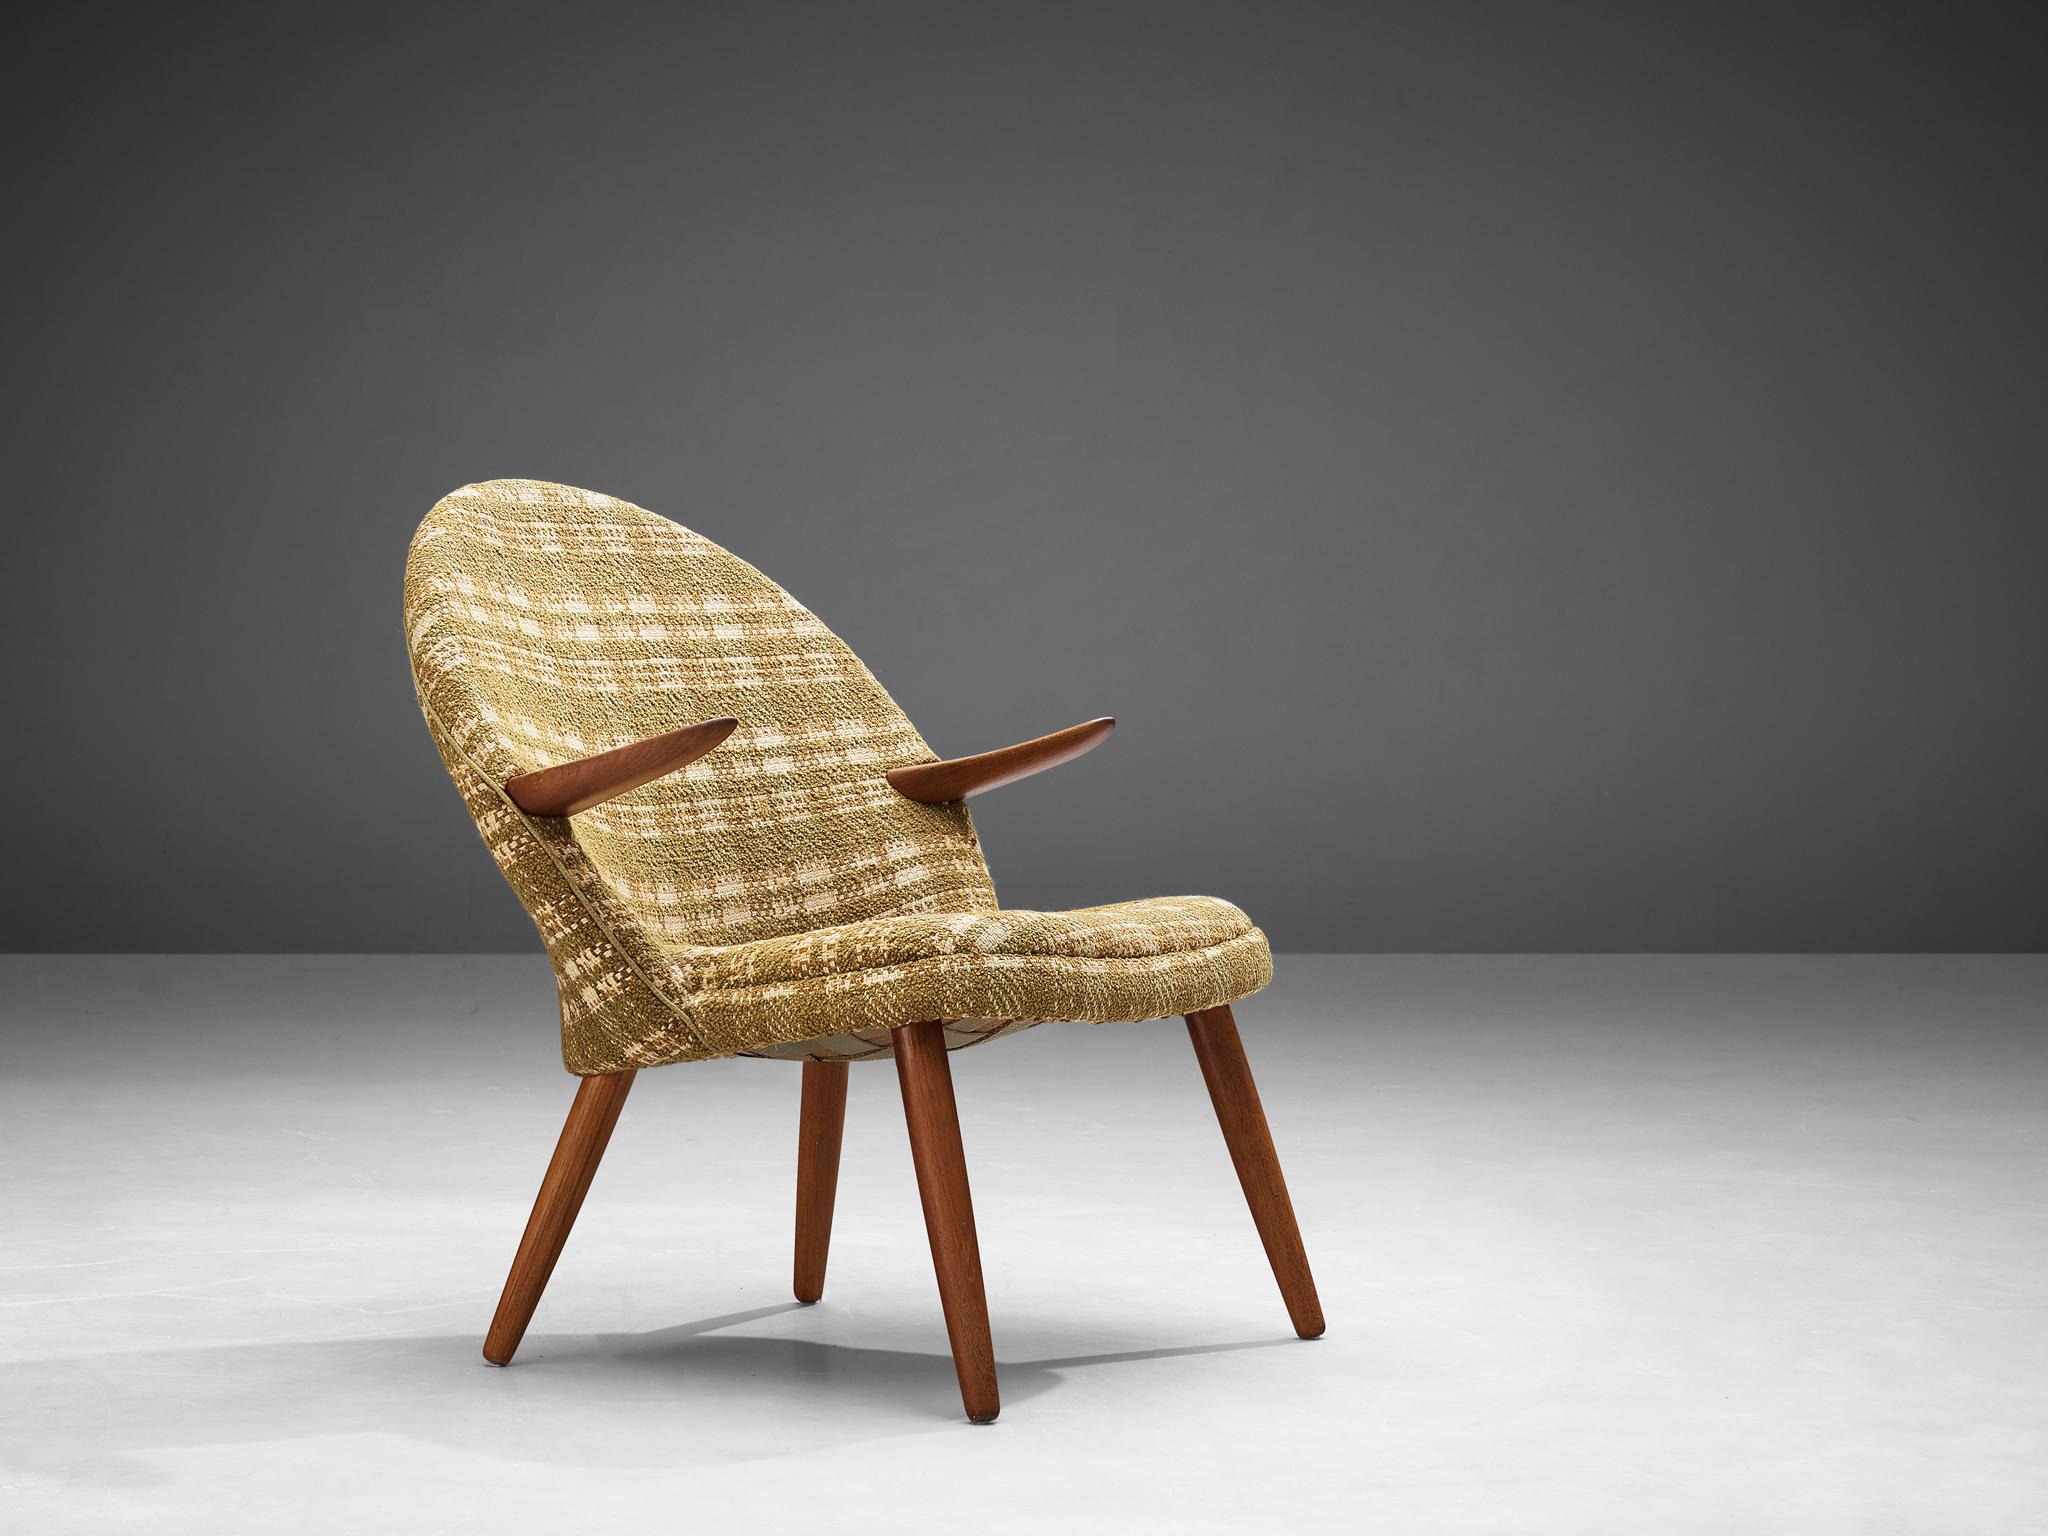 Kurt Olsen Glostrup Møbelfabrik, lounge chair, teak, fabric, Denmark, 1960s

Stunning Danish lounge chair designed by Kurt Olsen. The chair has a sculptural quality and light feeling. This is especially created by the floating teak armrests and